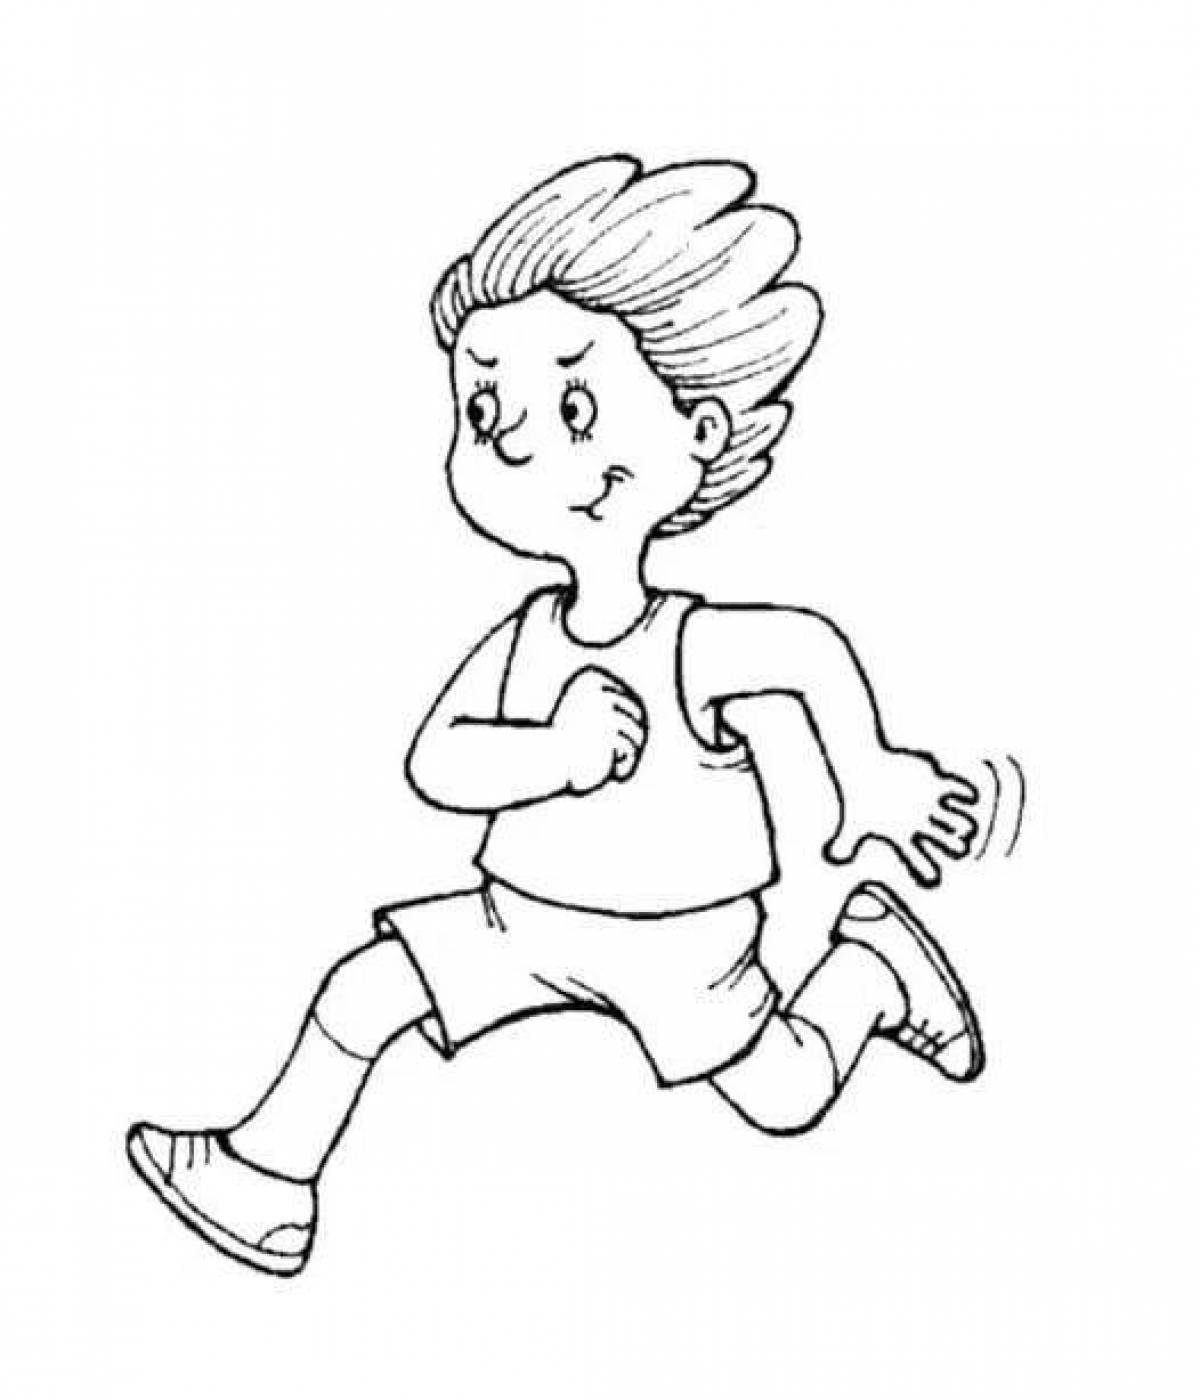 Live running coloring page